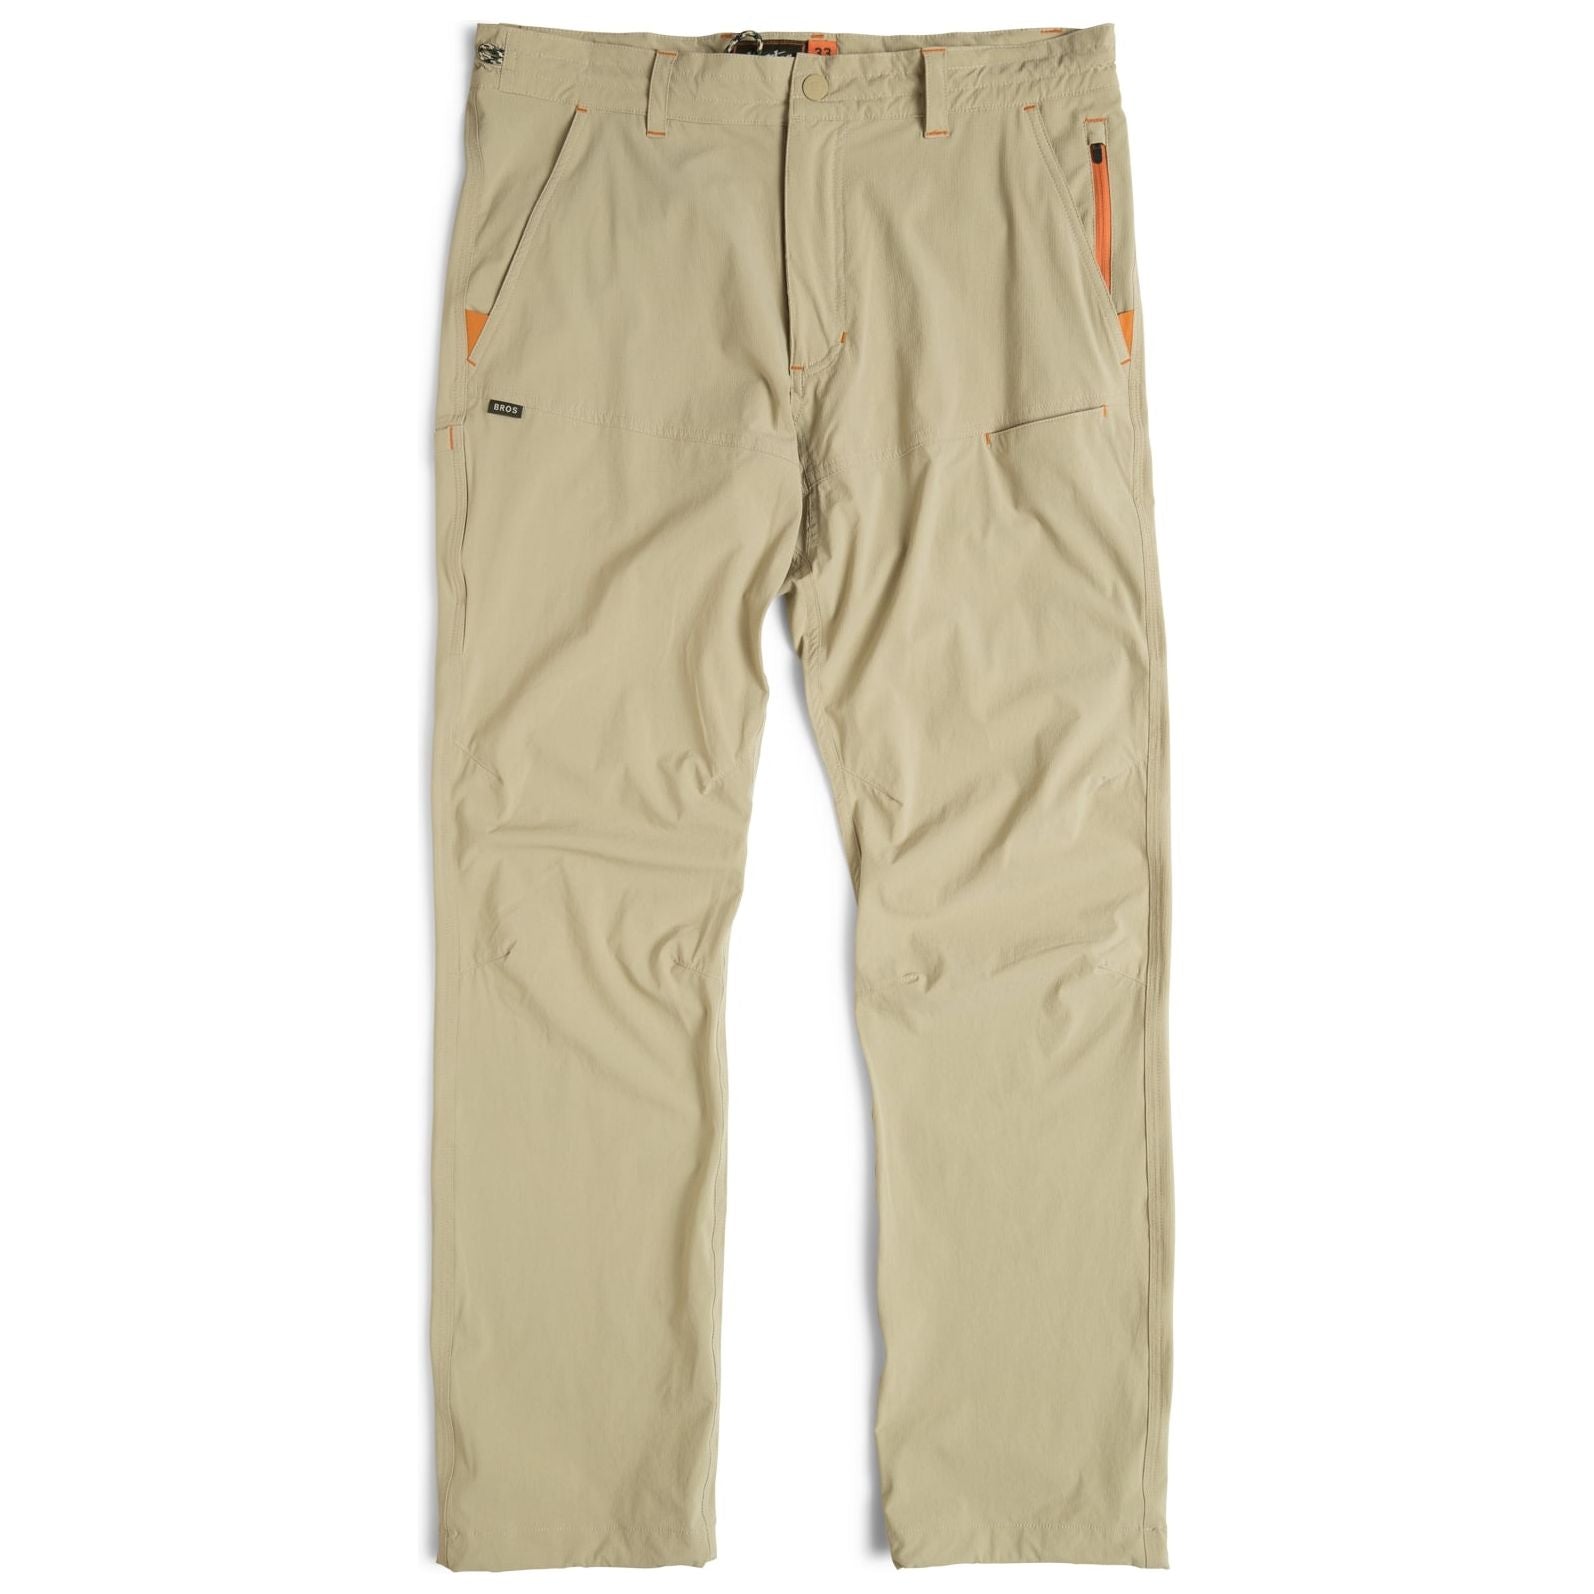 Howler Brothers Shoalwater Tech Pants - Sale